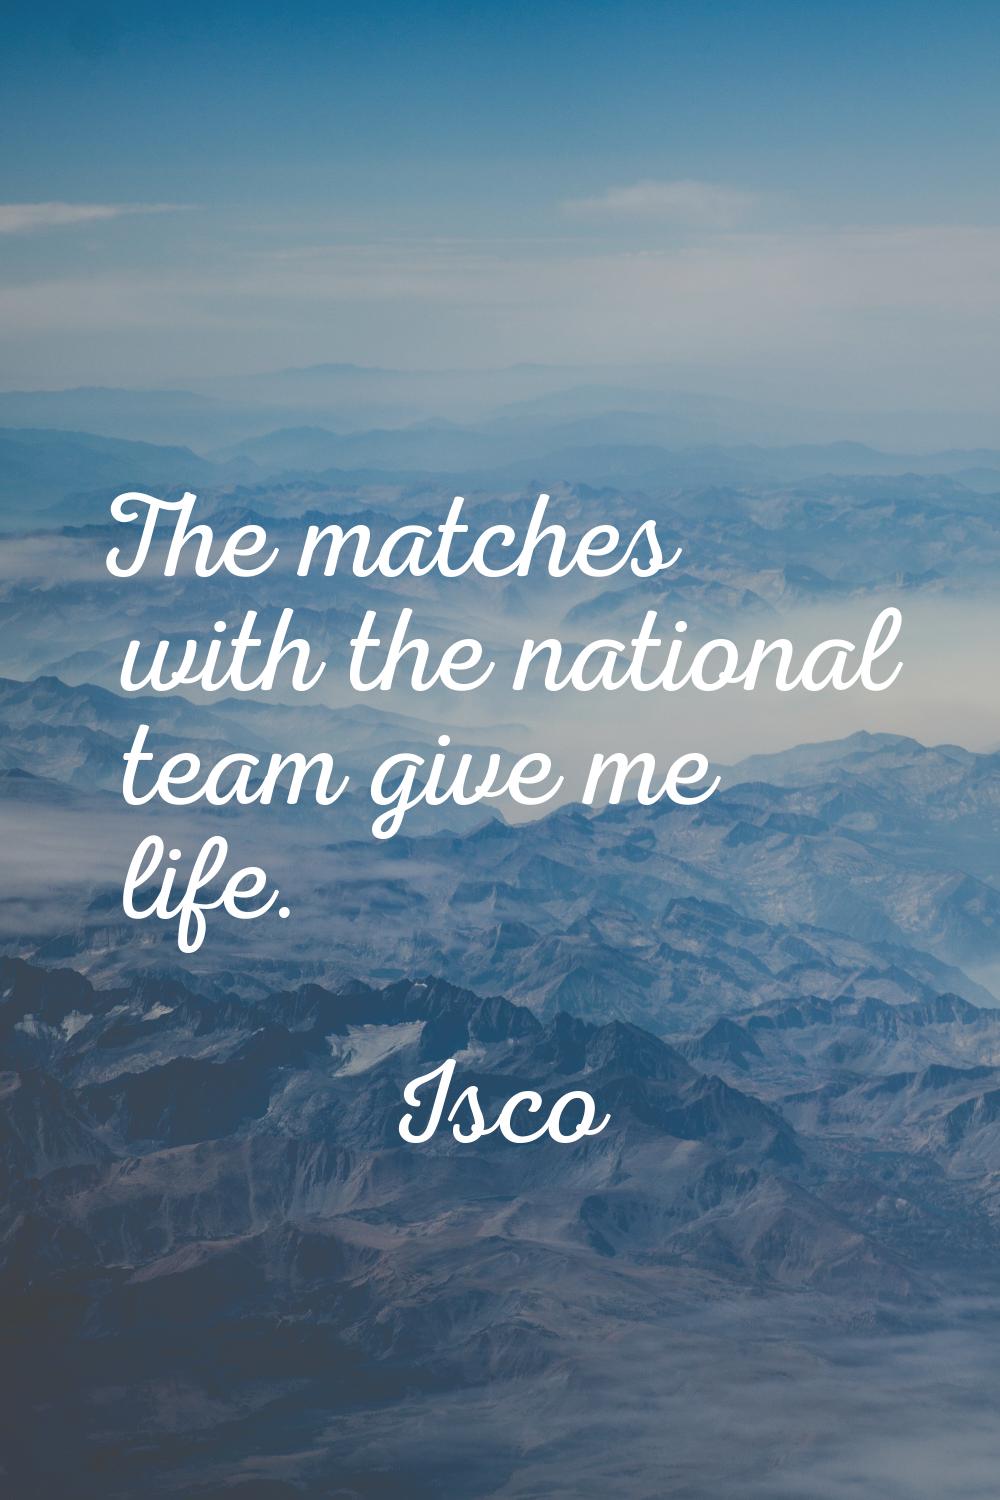 The matches with the national team give me life.